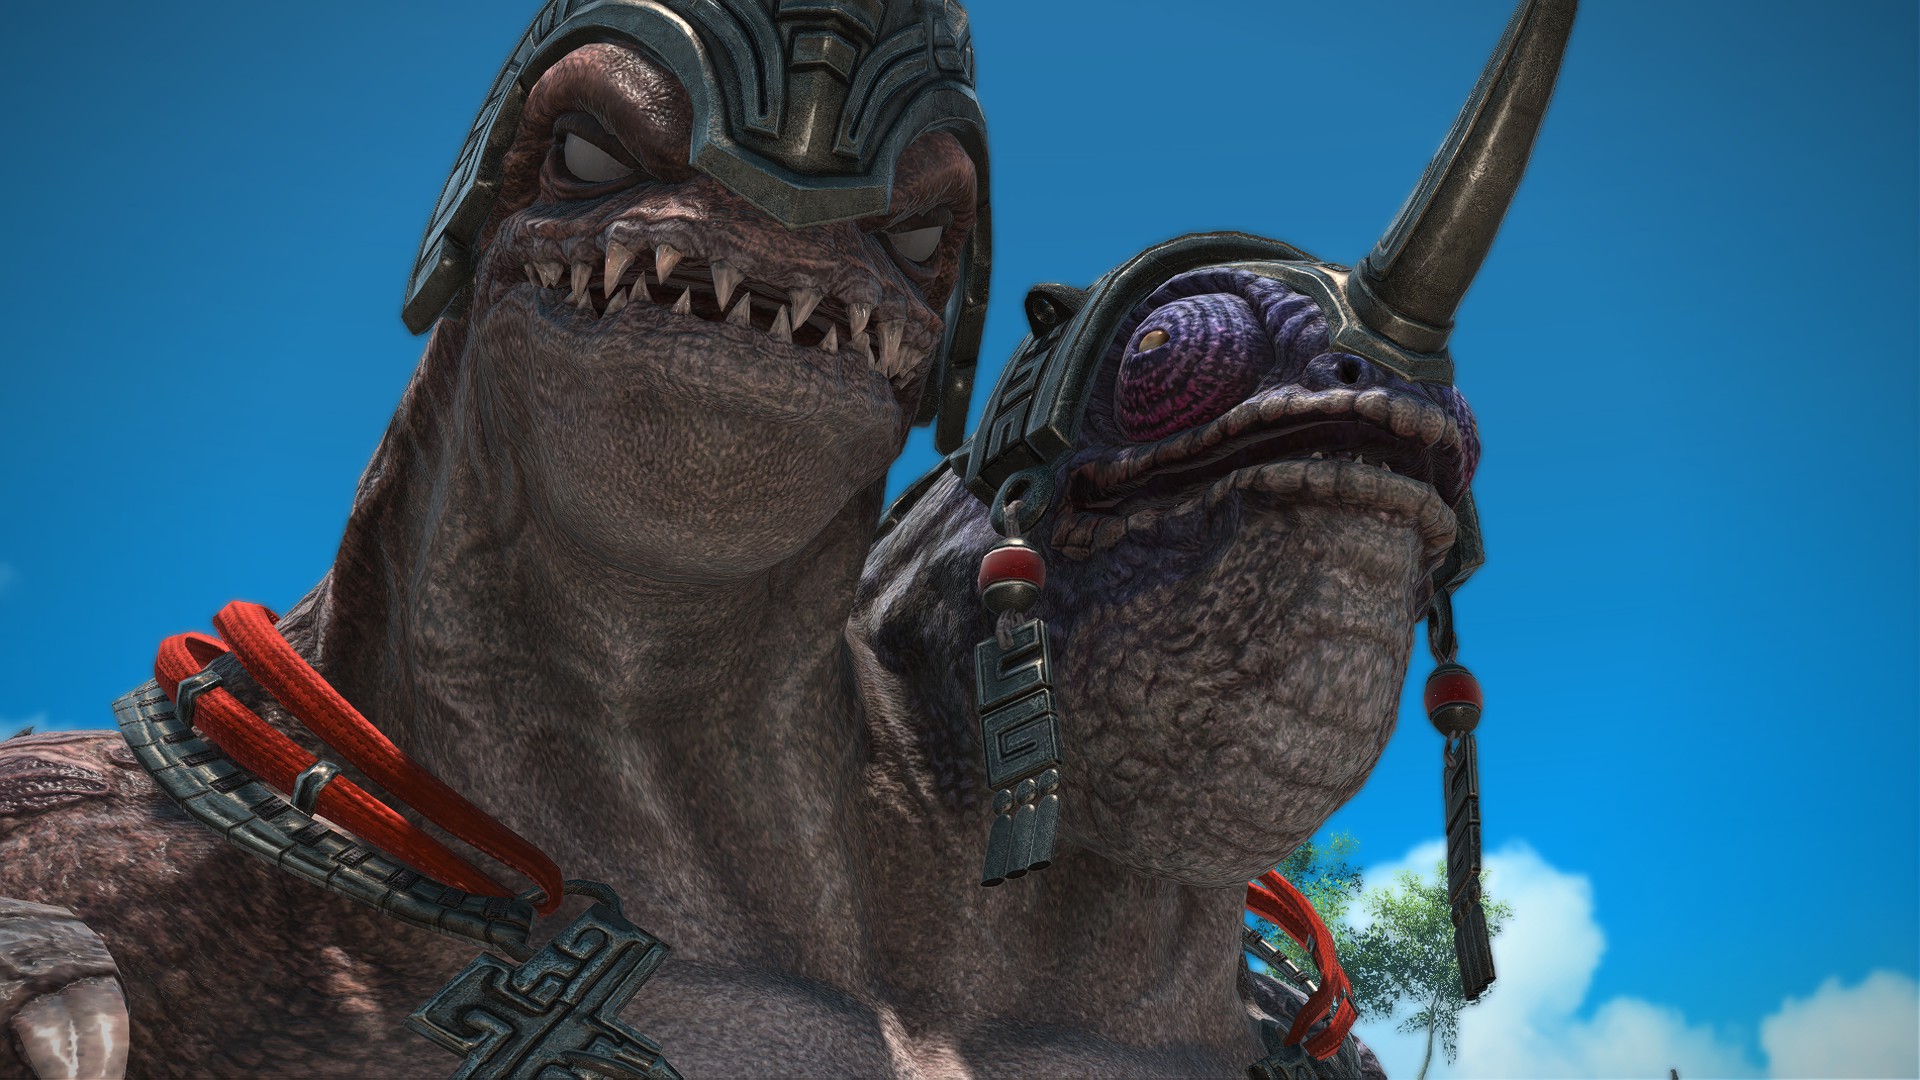 Bakool Ja Ja, a twin-headed Blessed Sibling from Final Fantasy 14, regards the camera with twin sets of mischievous smirks.